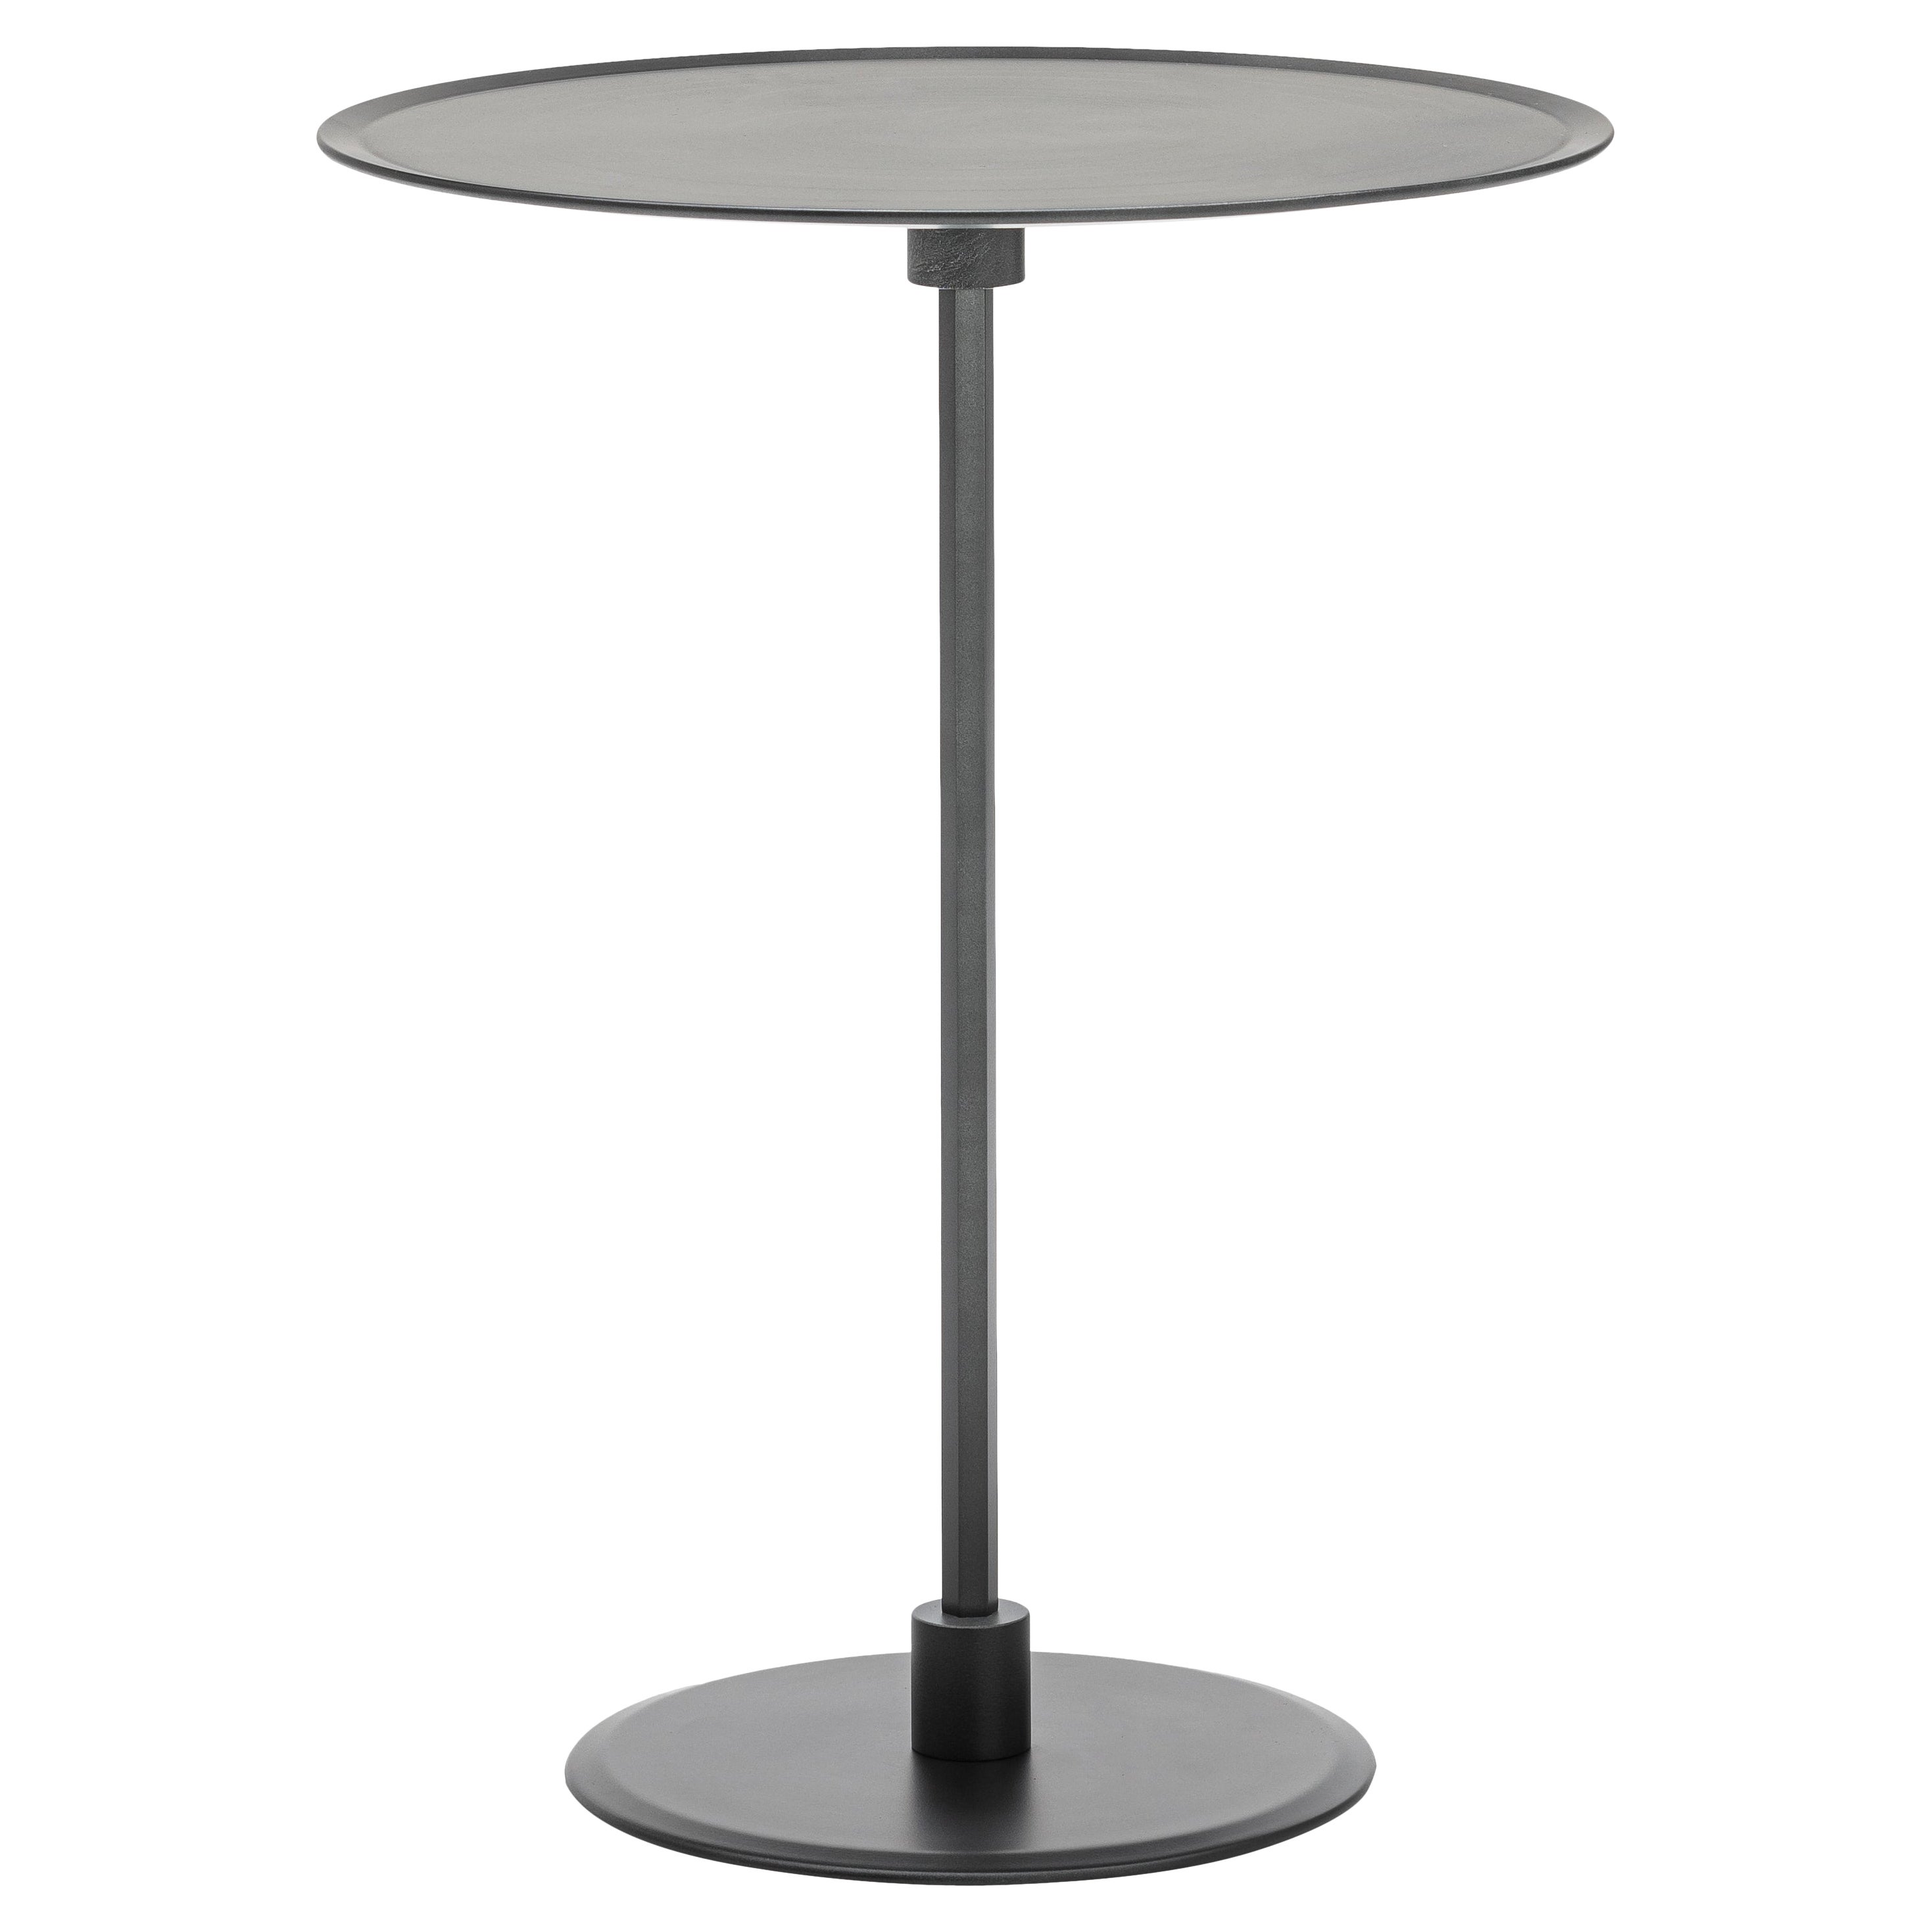 Acerbis Large Gong Side Table in Matt Painted Gunmetal Top with Frame